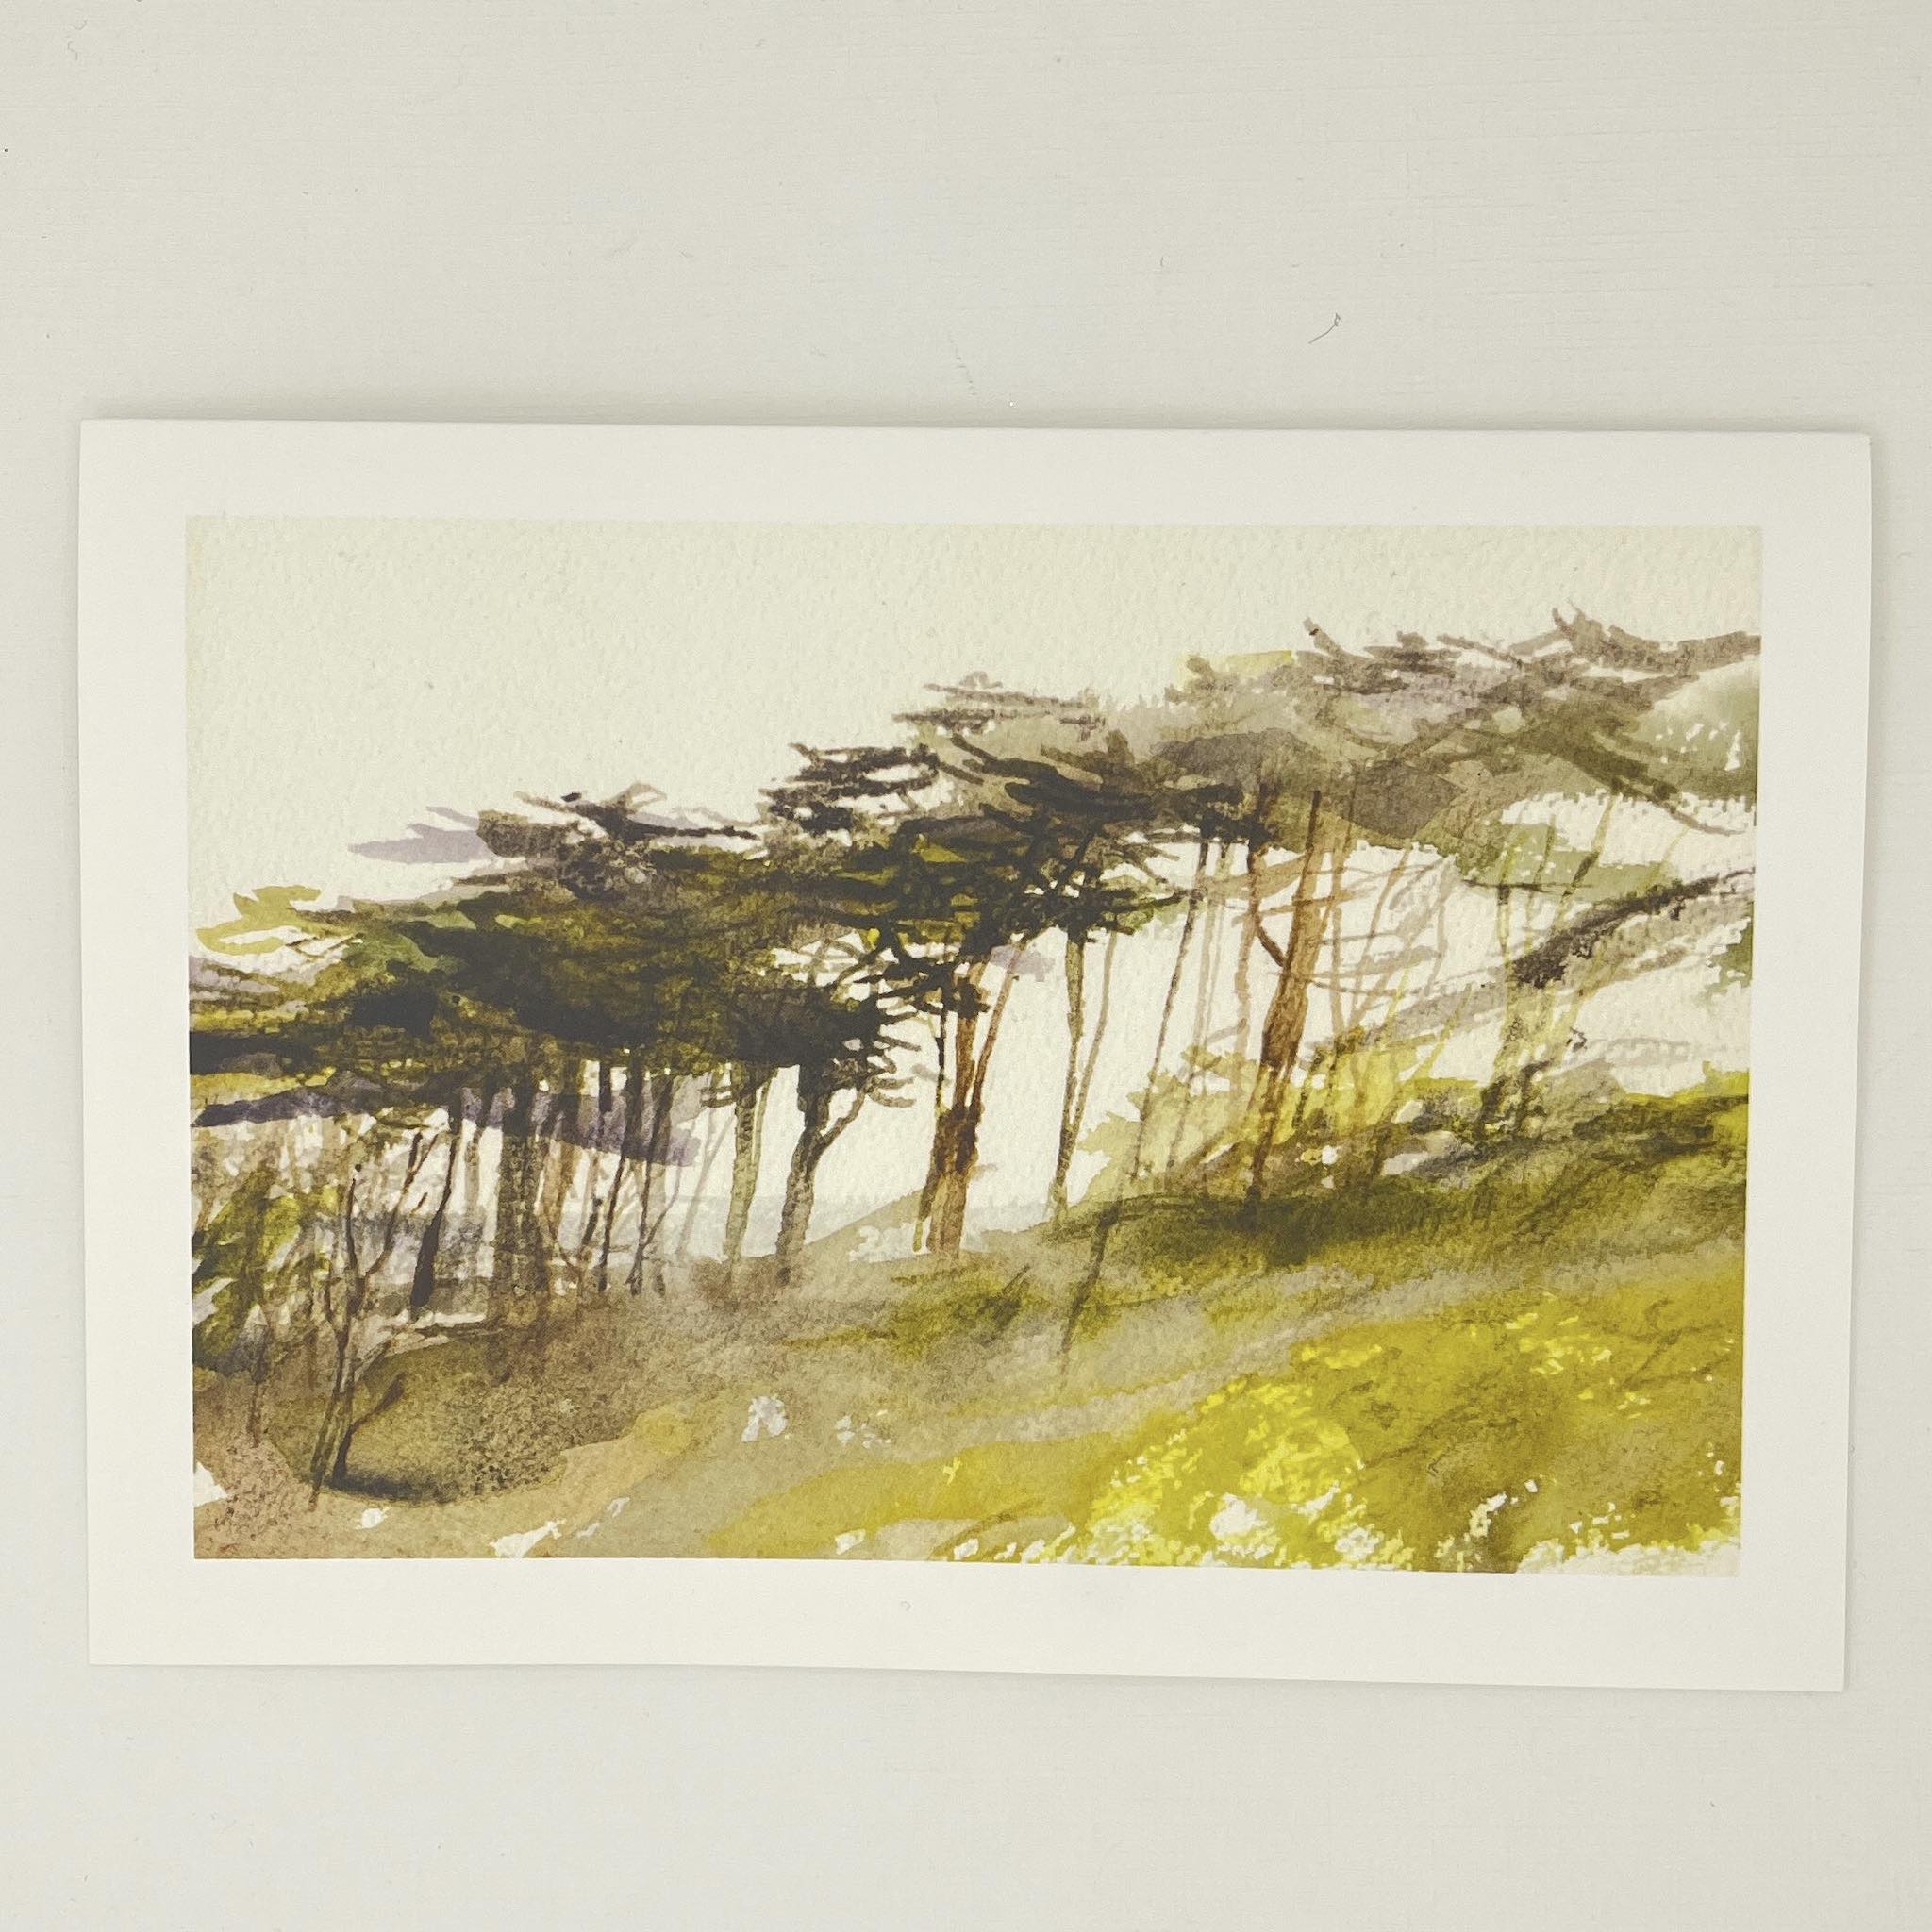 Laurie Wigham "Twisted Trees In Fog" Card